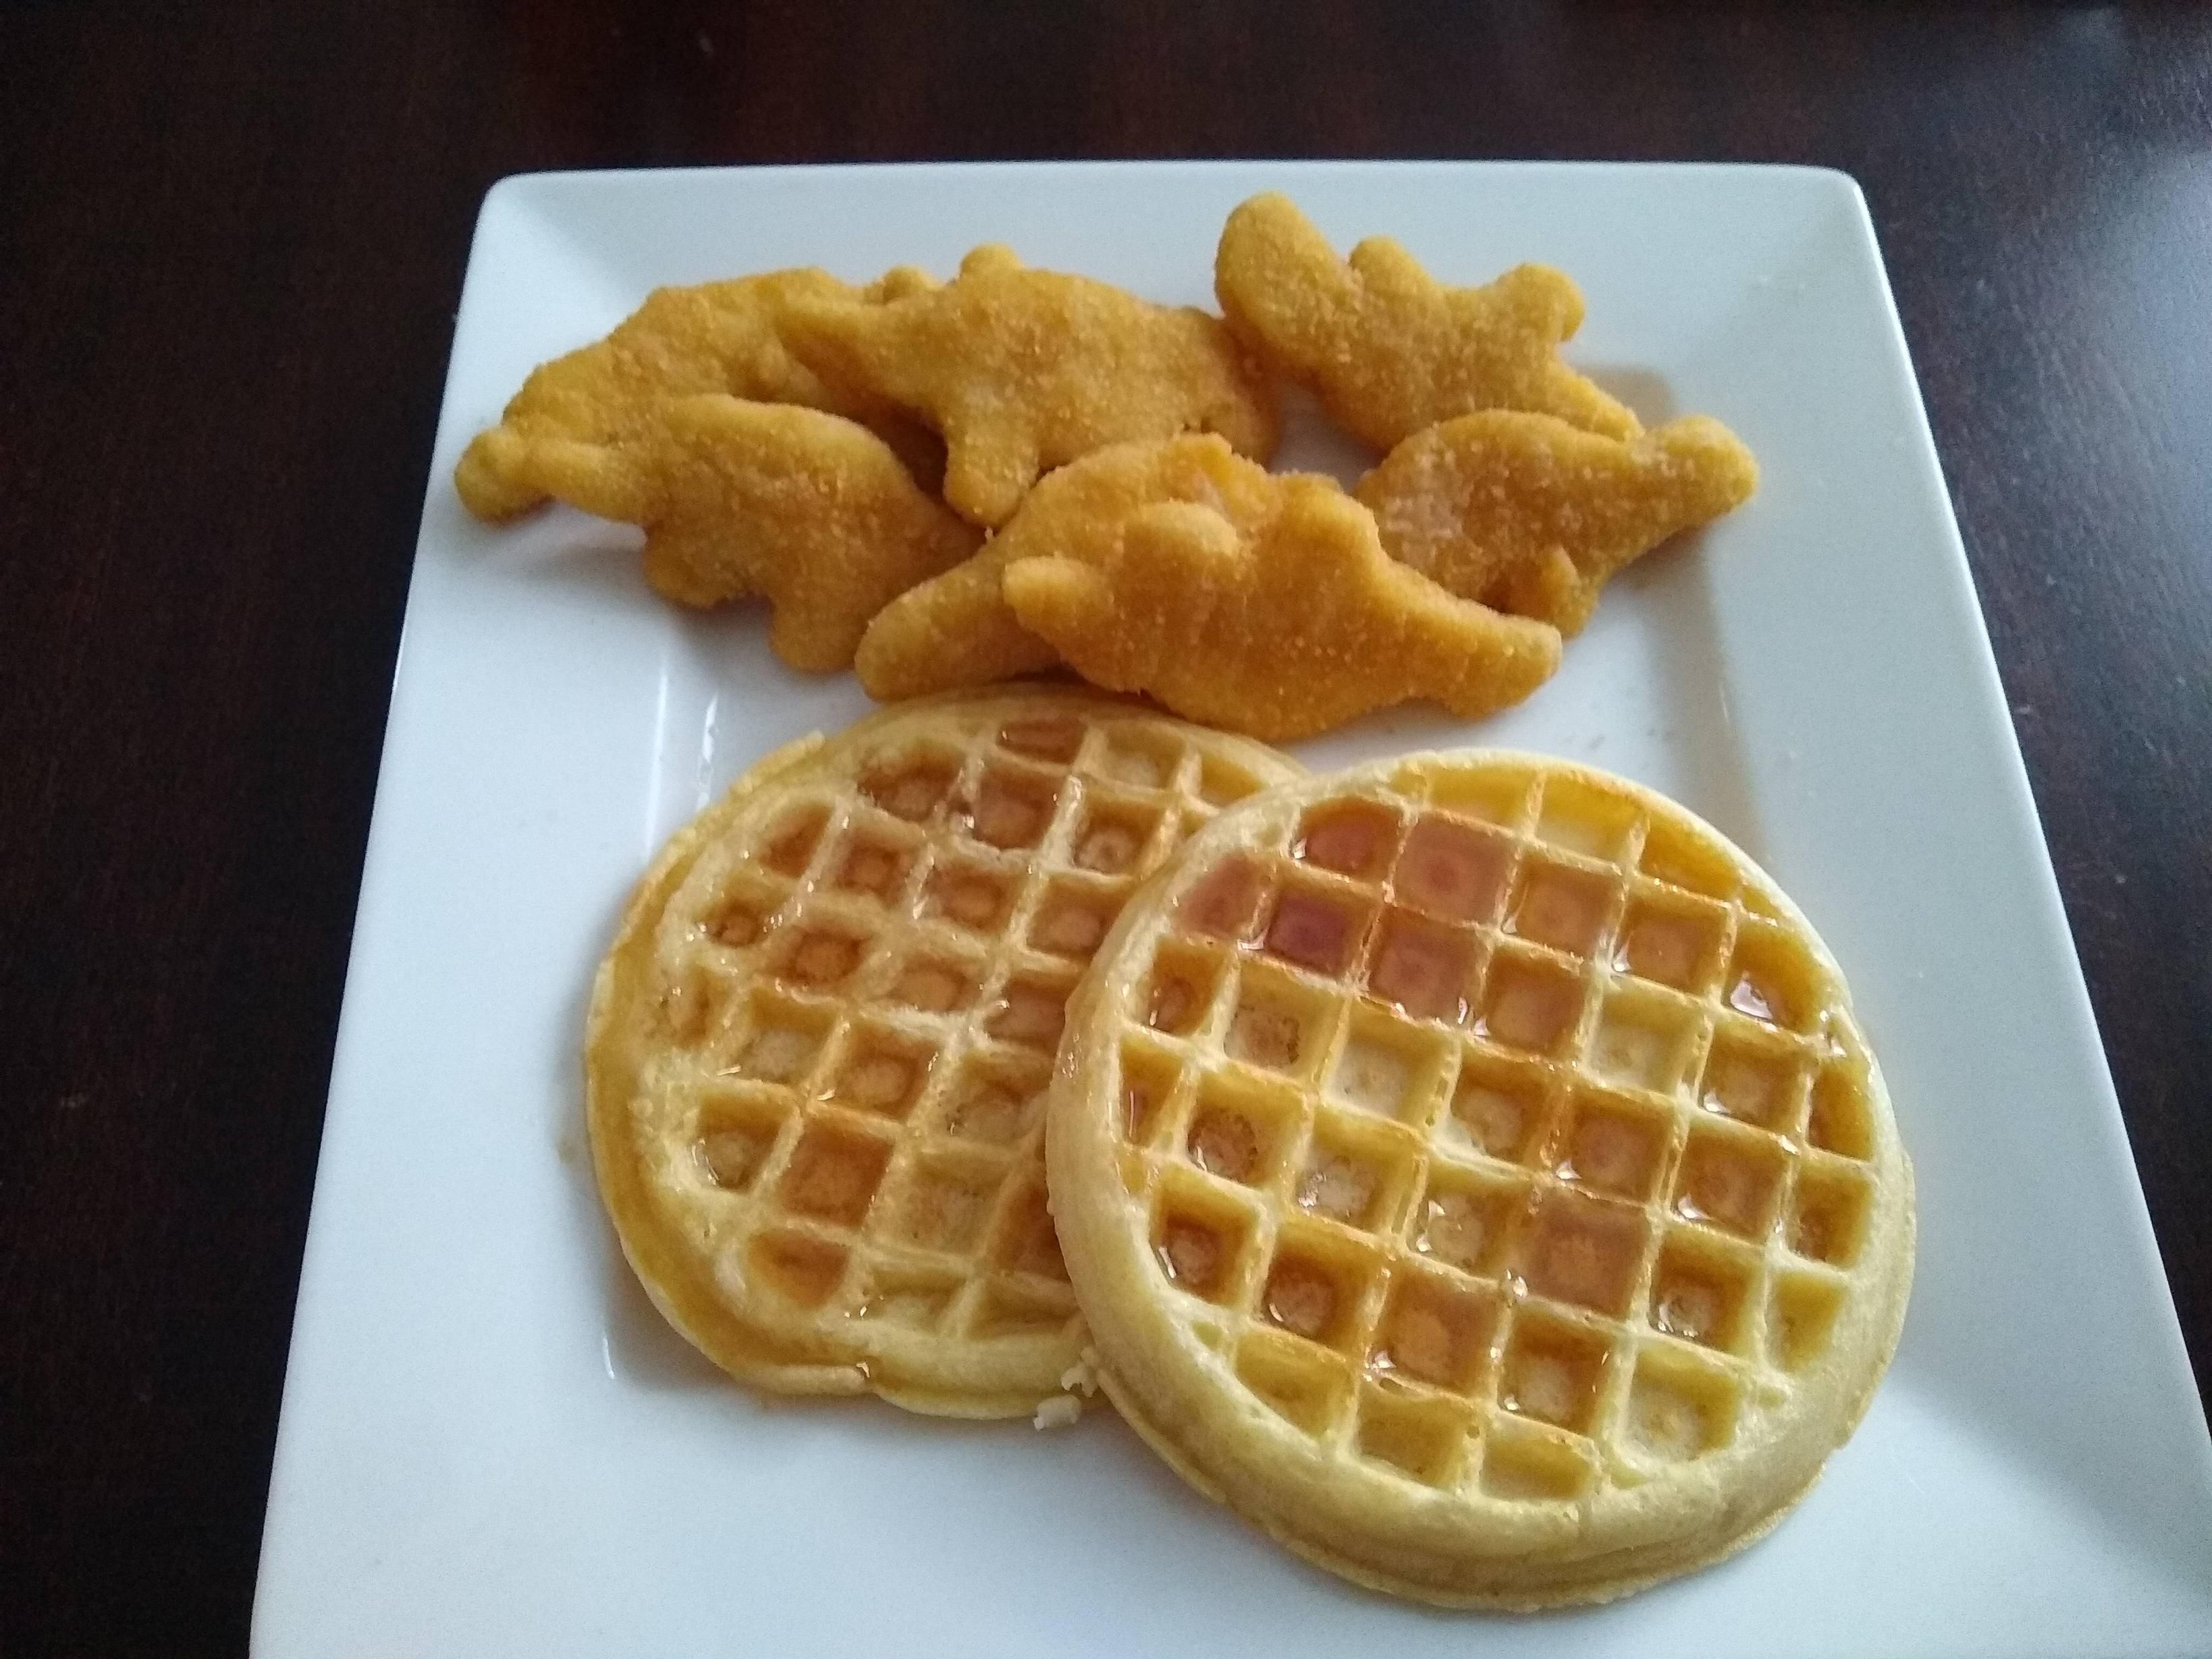 Poor man's chicken and waffles